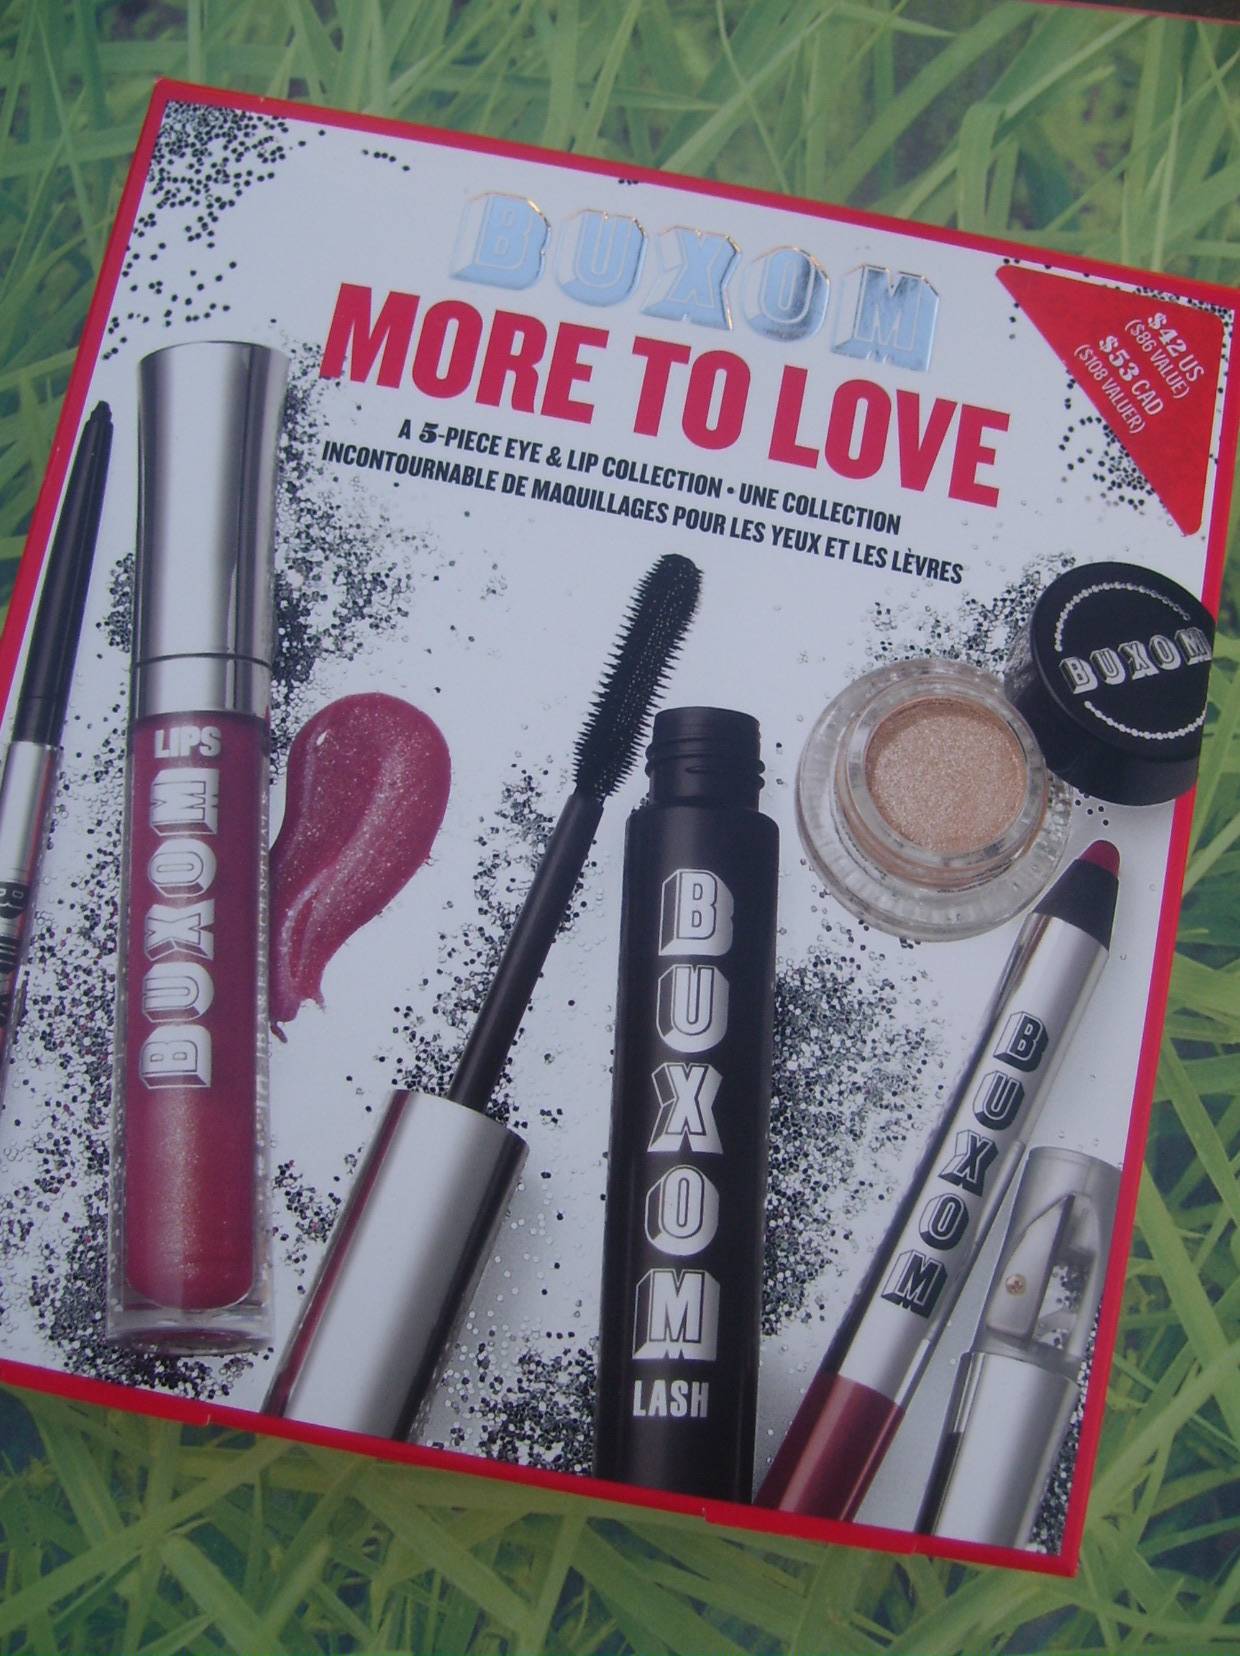 Bare Escentuals Created a Babe-in-a-Box with the Buxom More to Love Collection